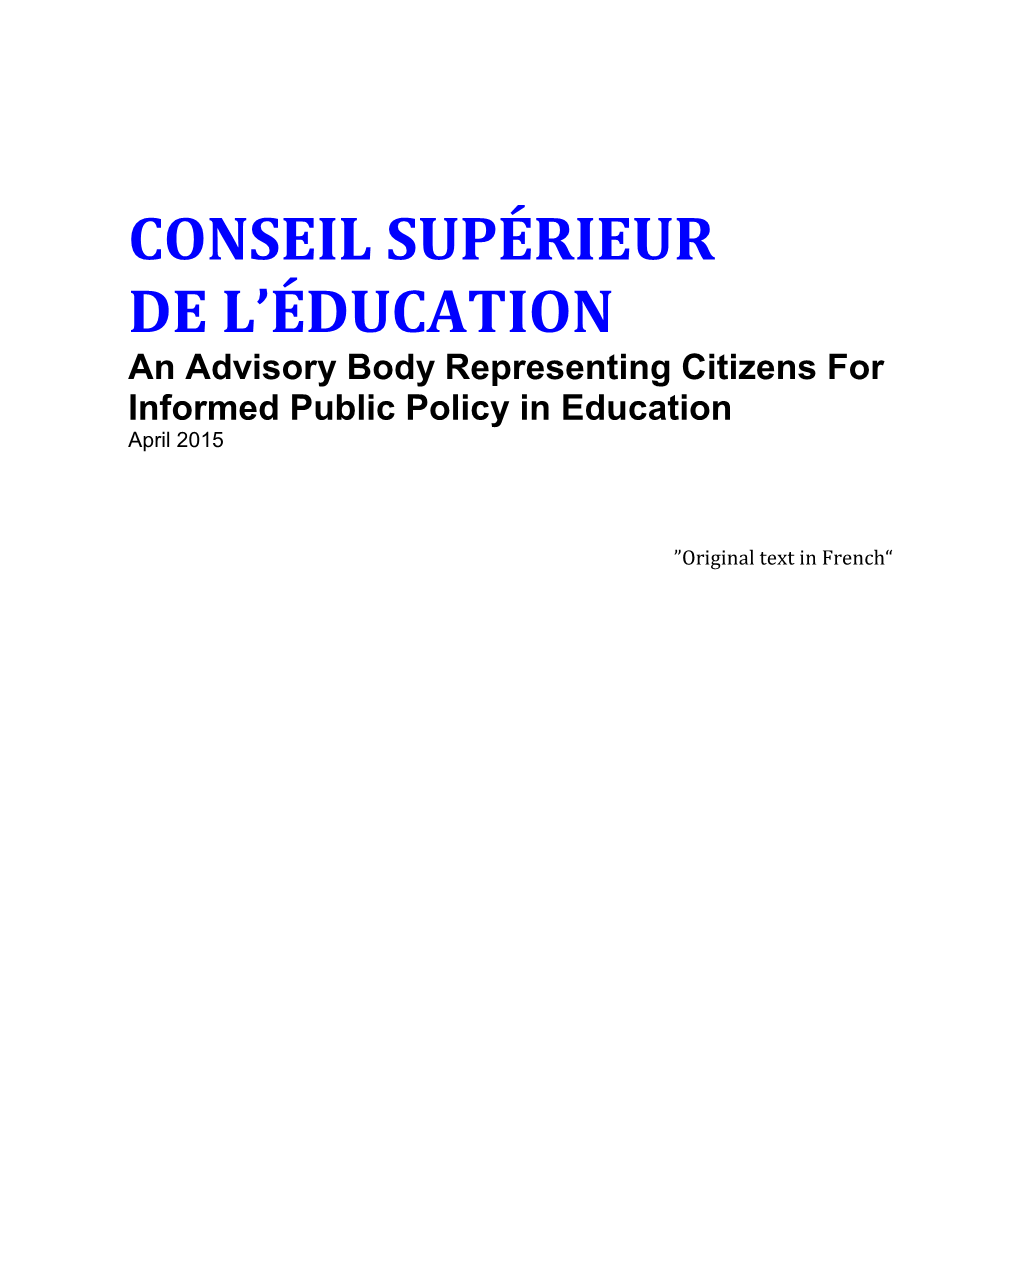 Conseil: an Advisory Body Representing Citizens for Informed Public Policy in Education 2